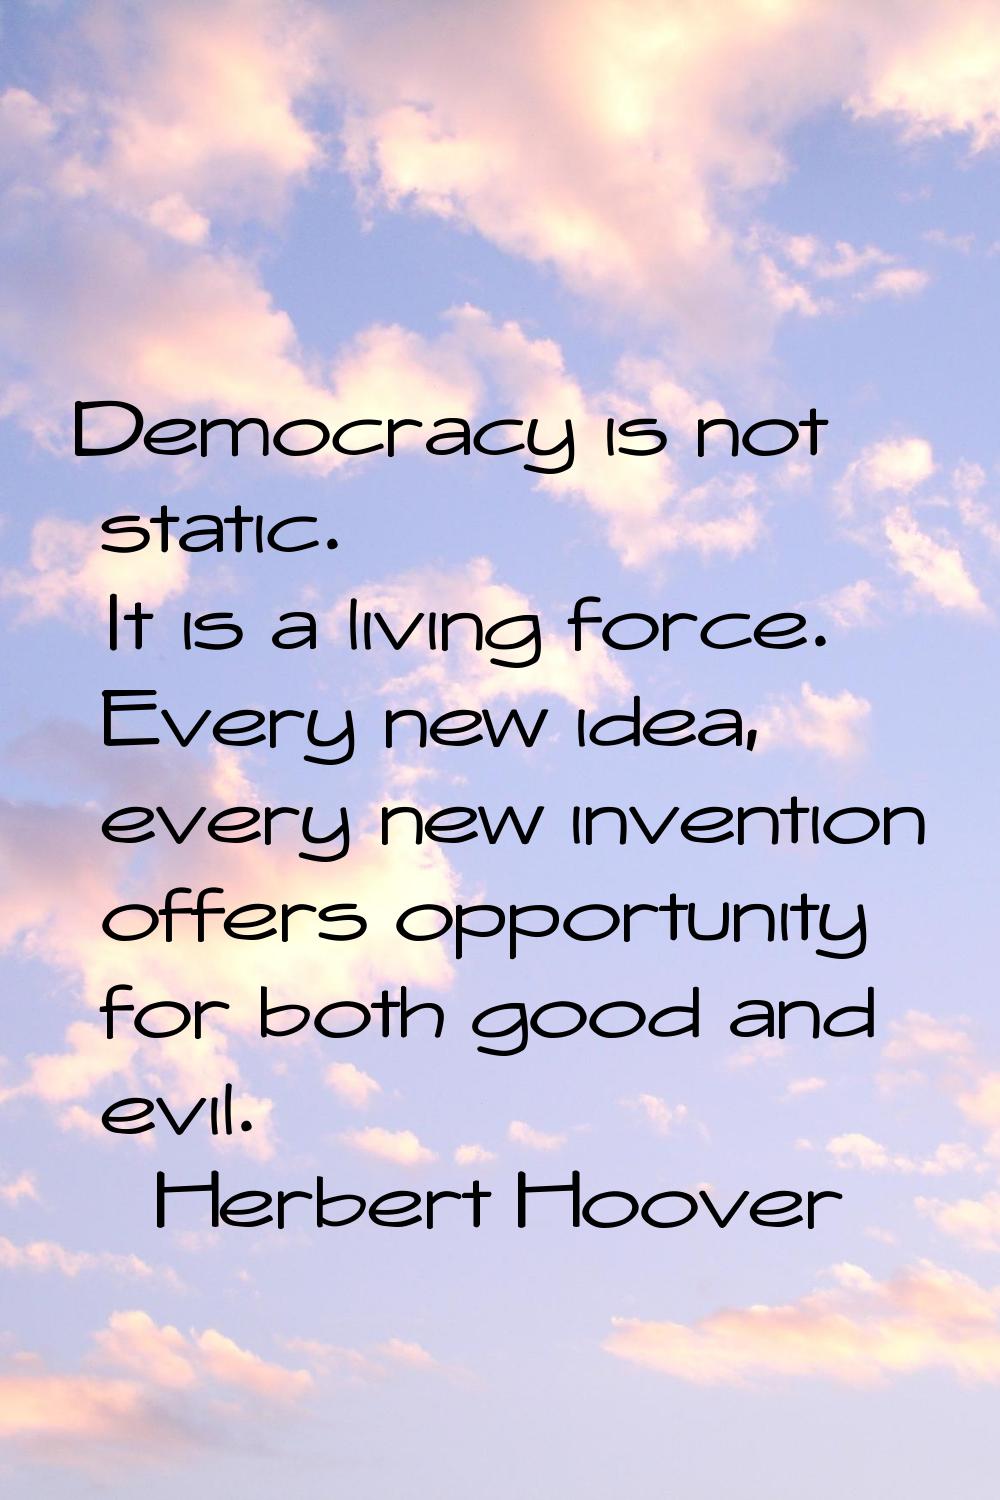 Democracy is not static. It is a living force. Every new idea, every new invention offers opportuni